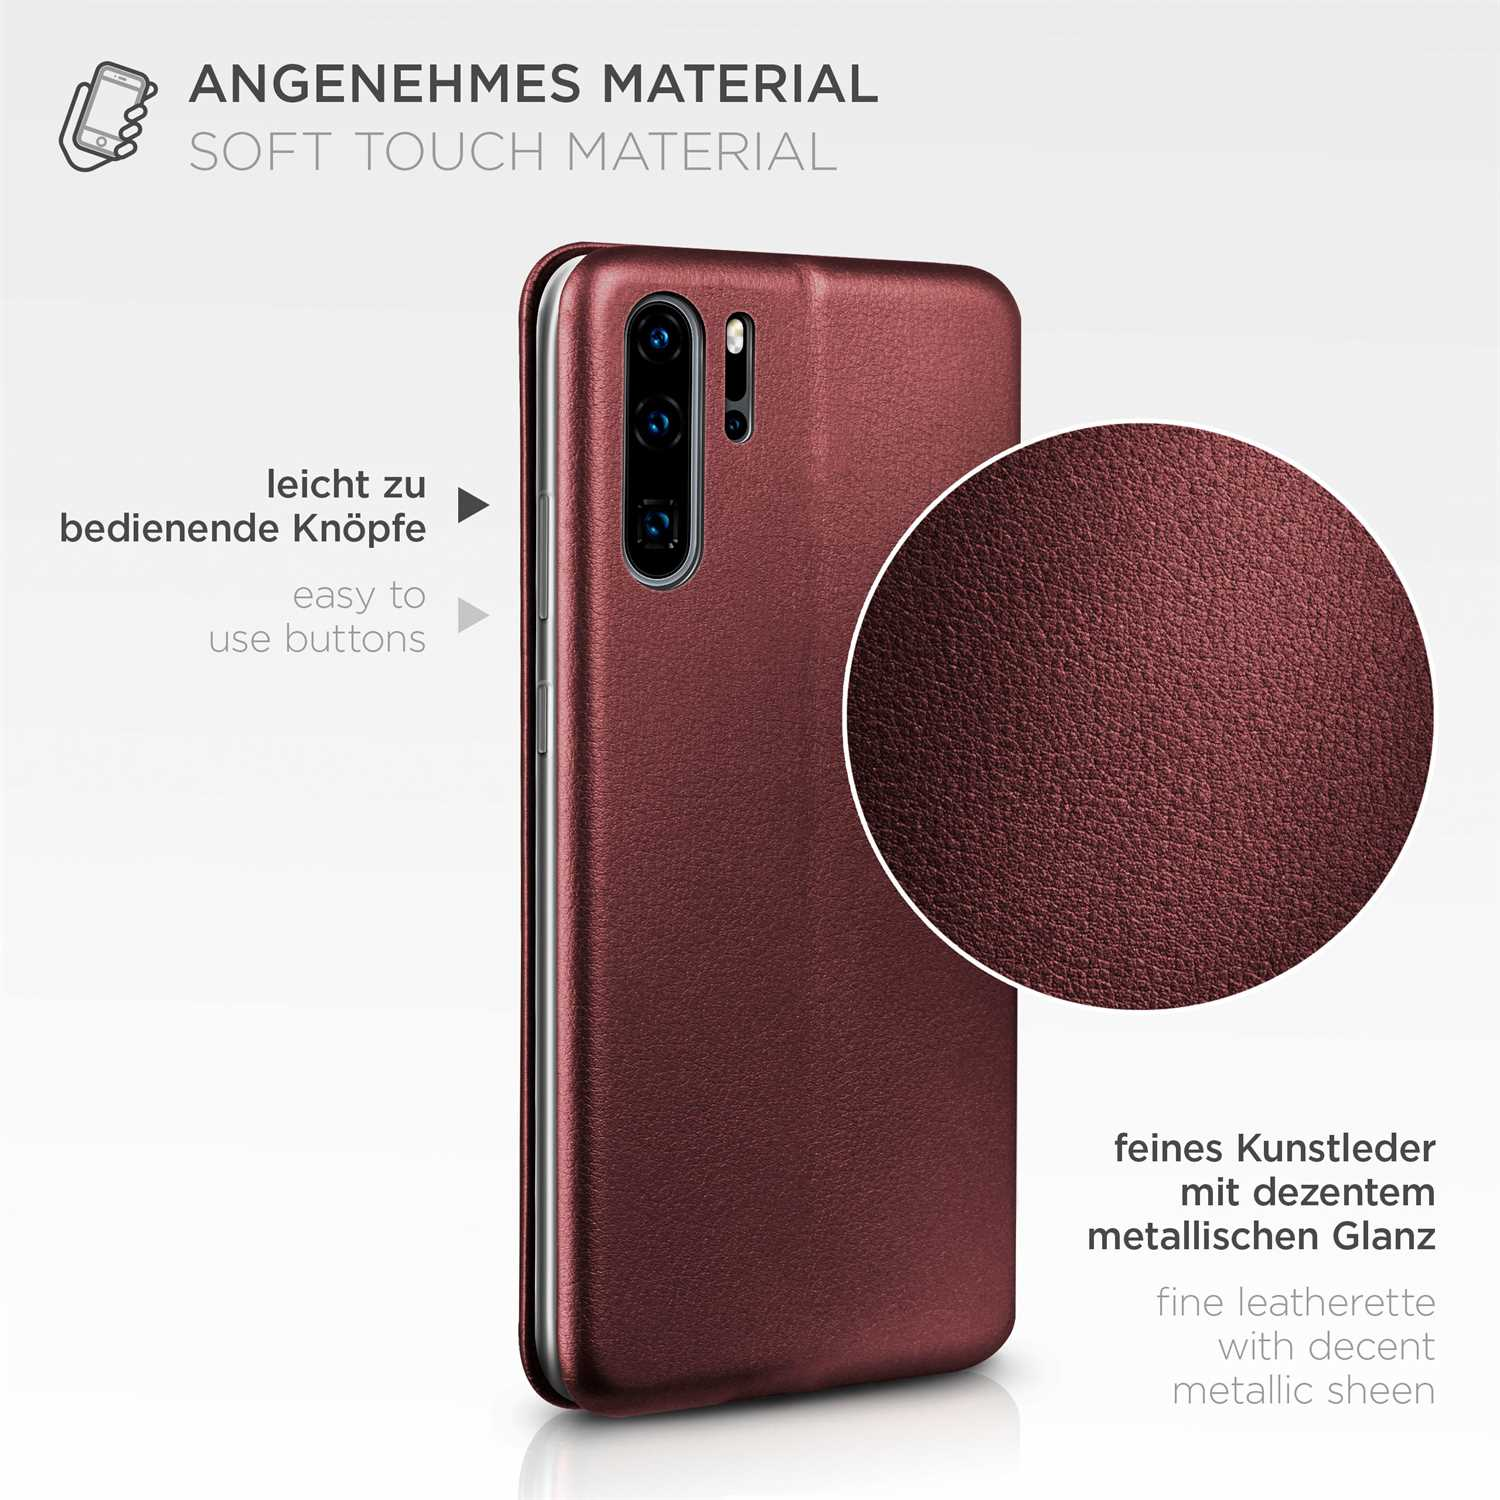 ONEFLOW Business Case, Flip Cover, Pro - Burgund Red Edition, P30 Huawei, New